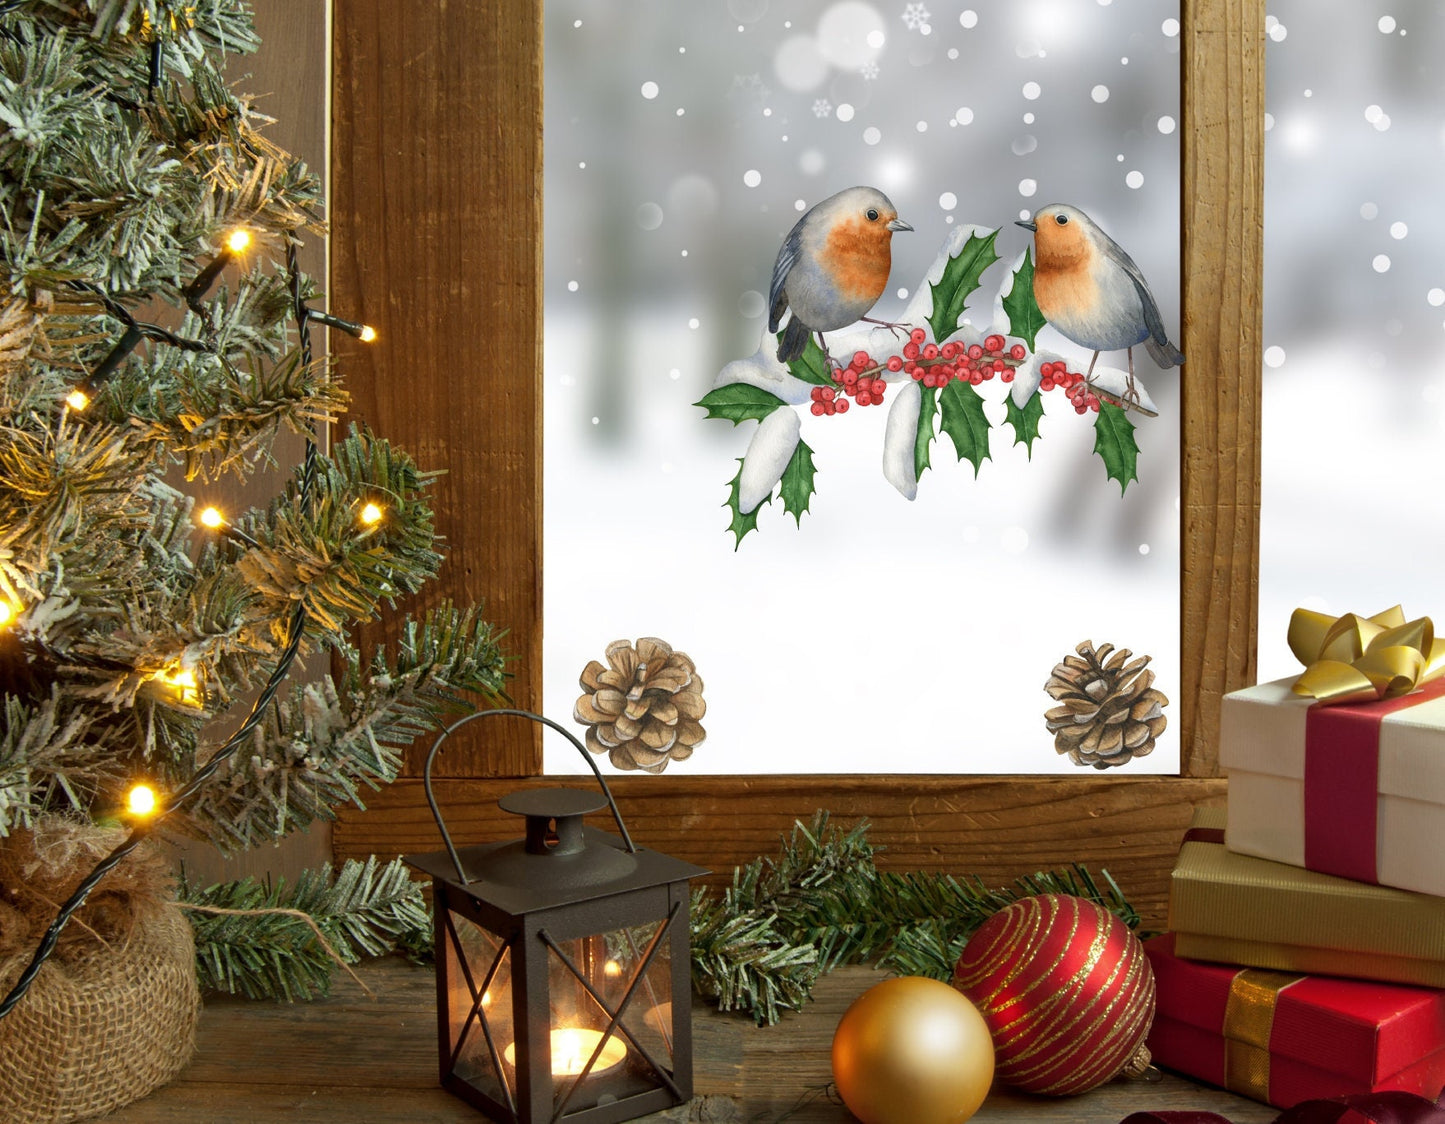 Robins Holly Branch With Pine Cones Christmas Window Decals, Christmas Window Stickers, Robin Stickers, Holiday Decor